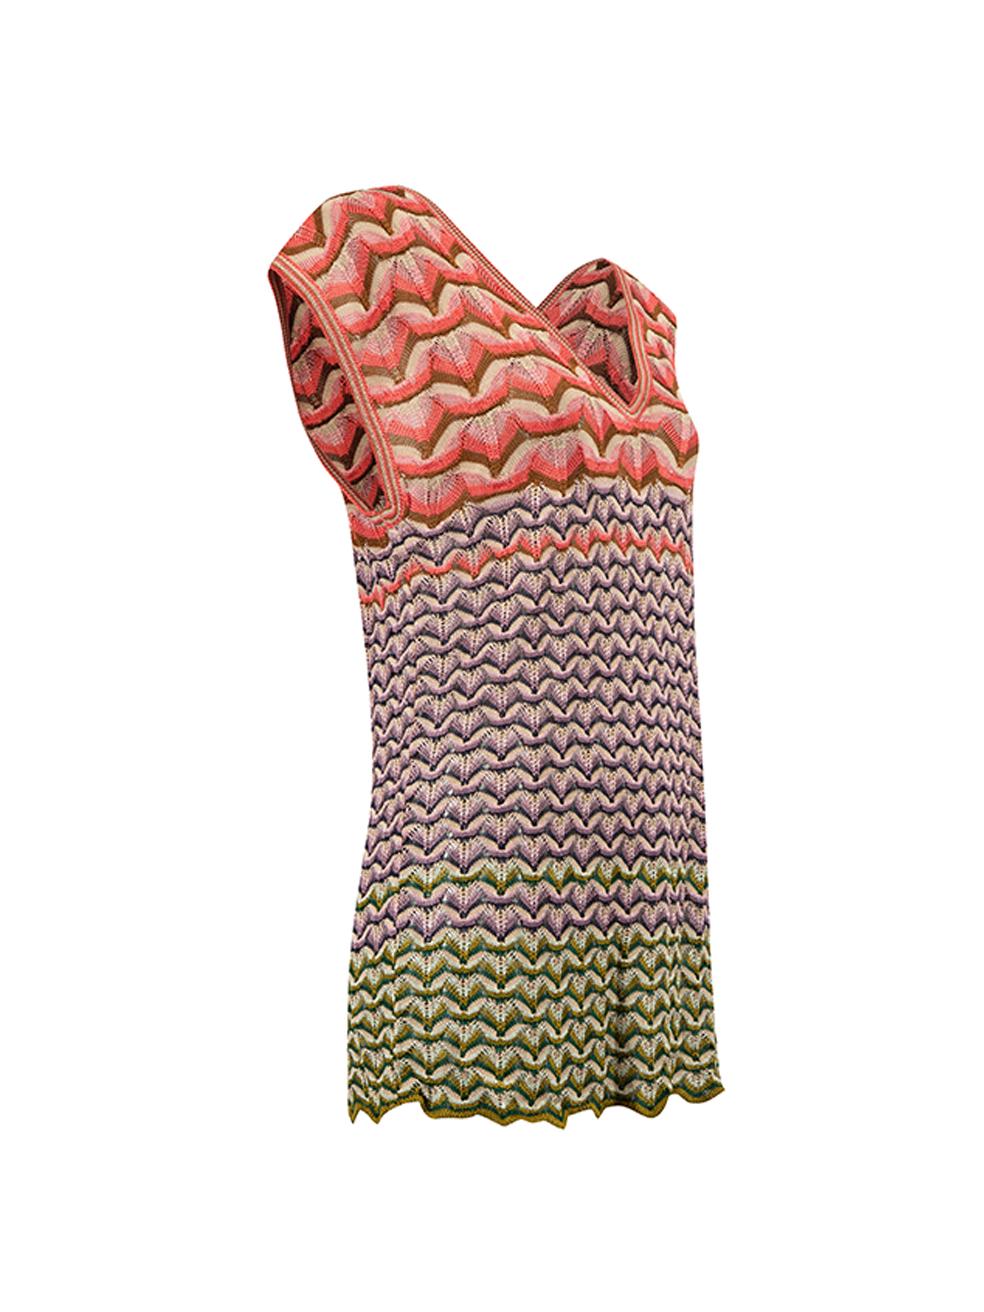 CONDITION is Very good. Hardly any visible wear to dress is evident on this used Missoni designer resale item. Details Multicolour Viscose Knit vest Abstract pattern Long line V neckline Made in Italy Composition 75% Viscose and 25% Silk Care